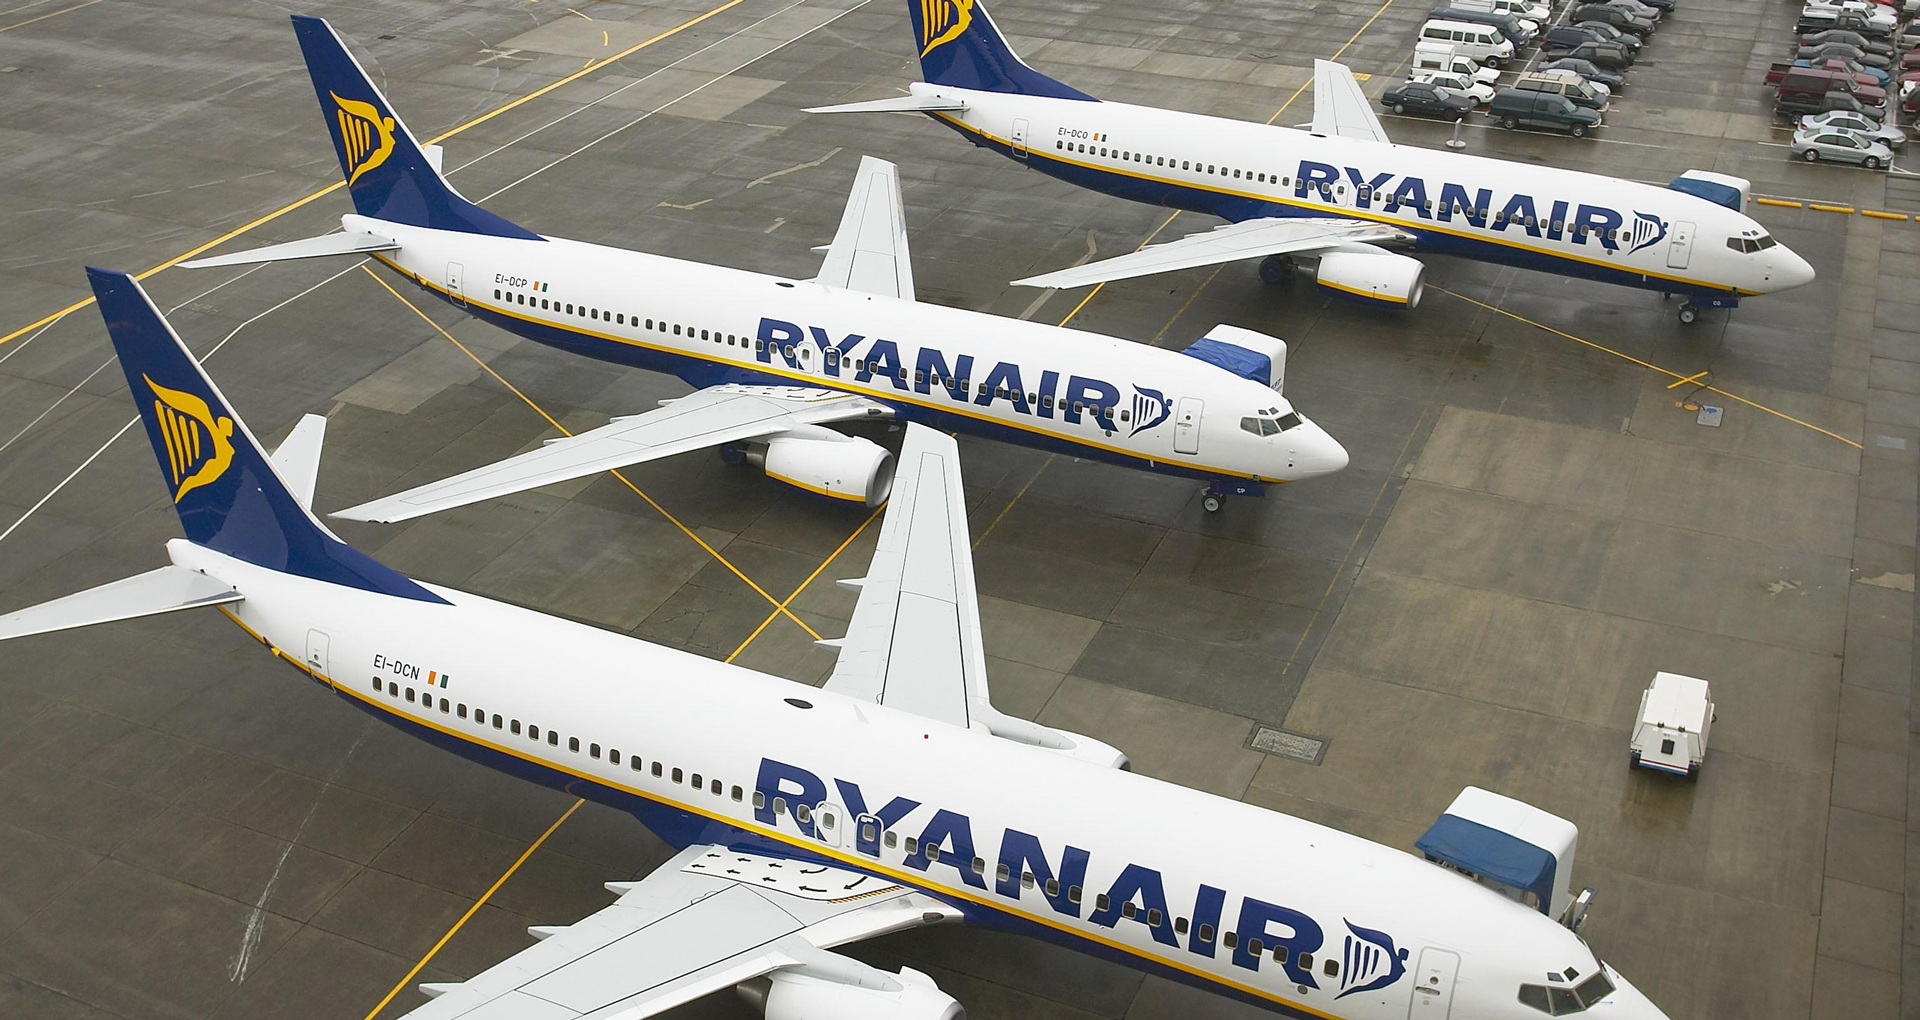 Ryanair aircrafts on the ground